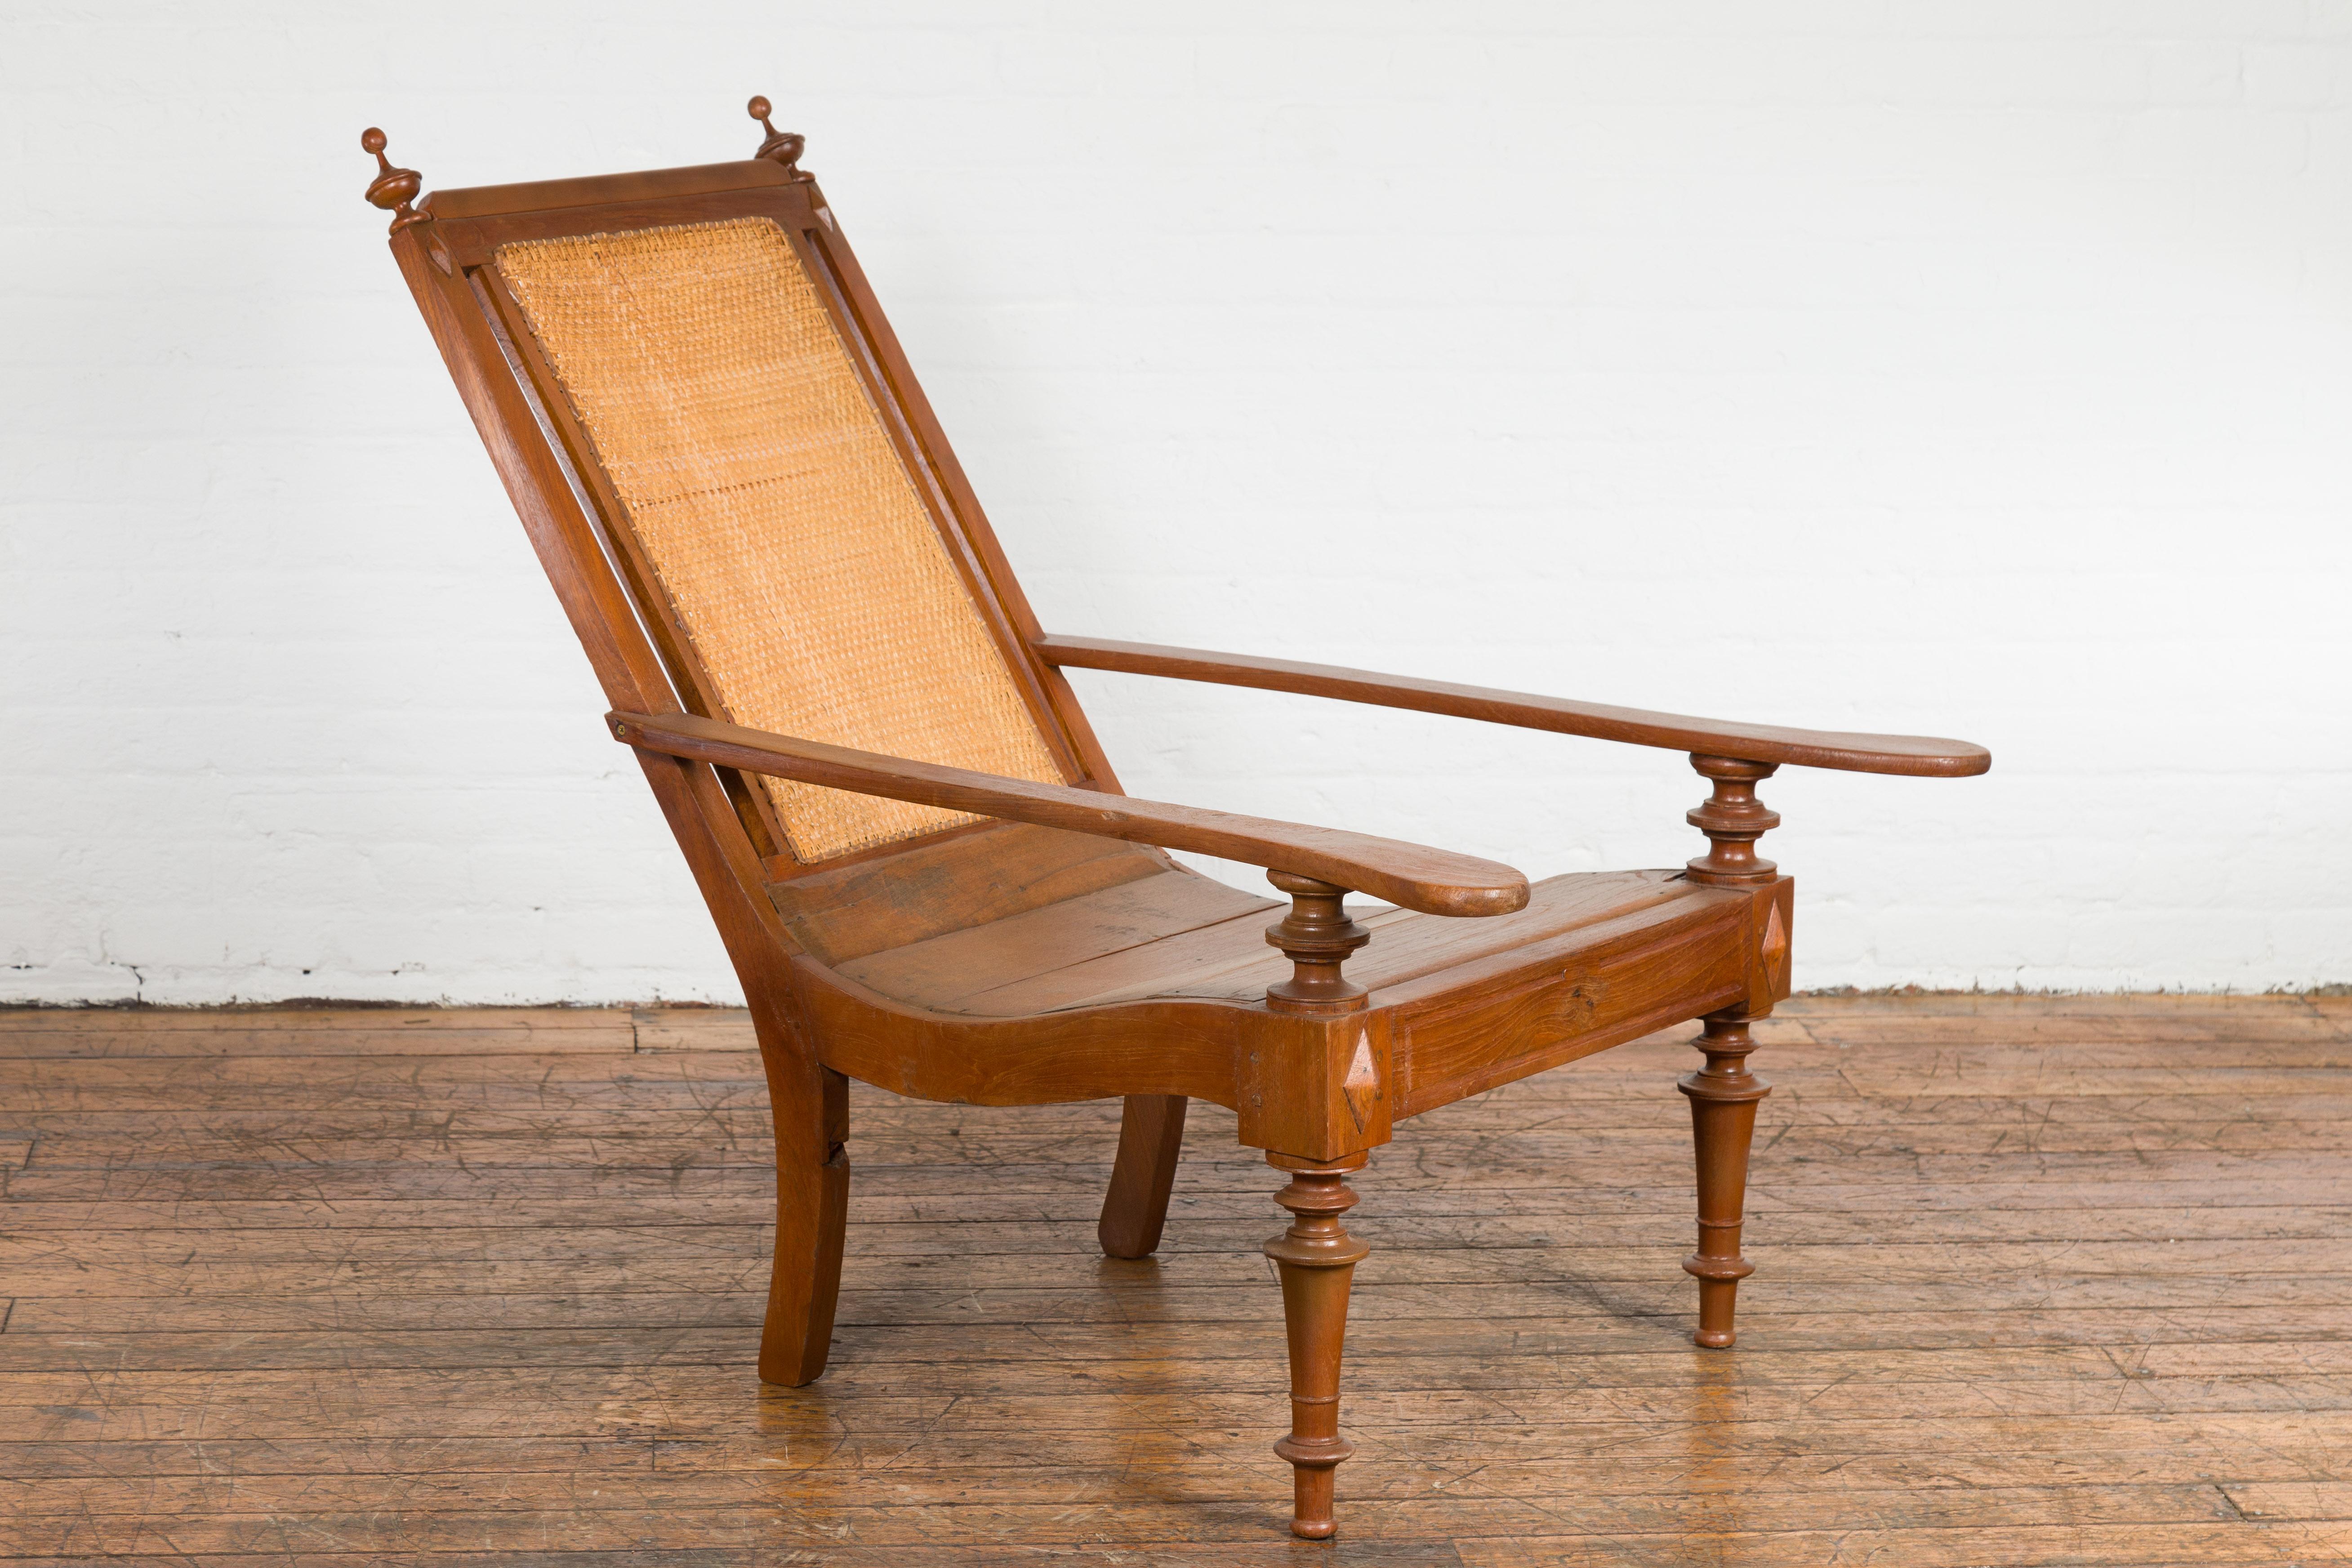 A Dutch Colonial wooden lounge chair from the early 20th century with slanted rattan back, long arms, carved diamond motifs on the knees and turned legs in the front. Nestled in the legacy of the early 20th century, this wooden lounge chair exudes a